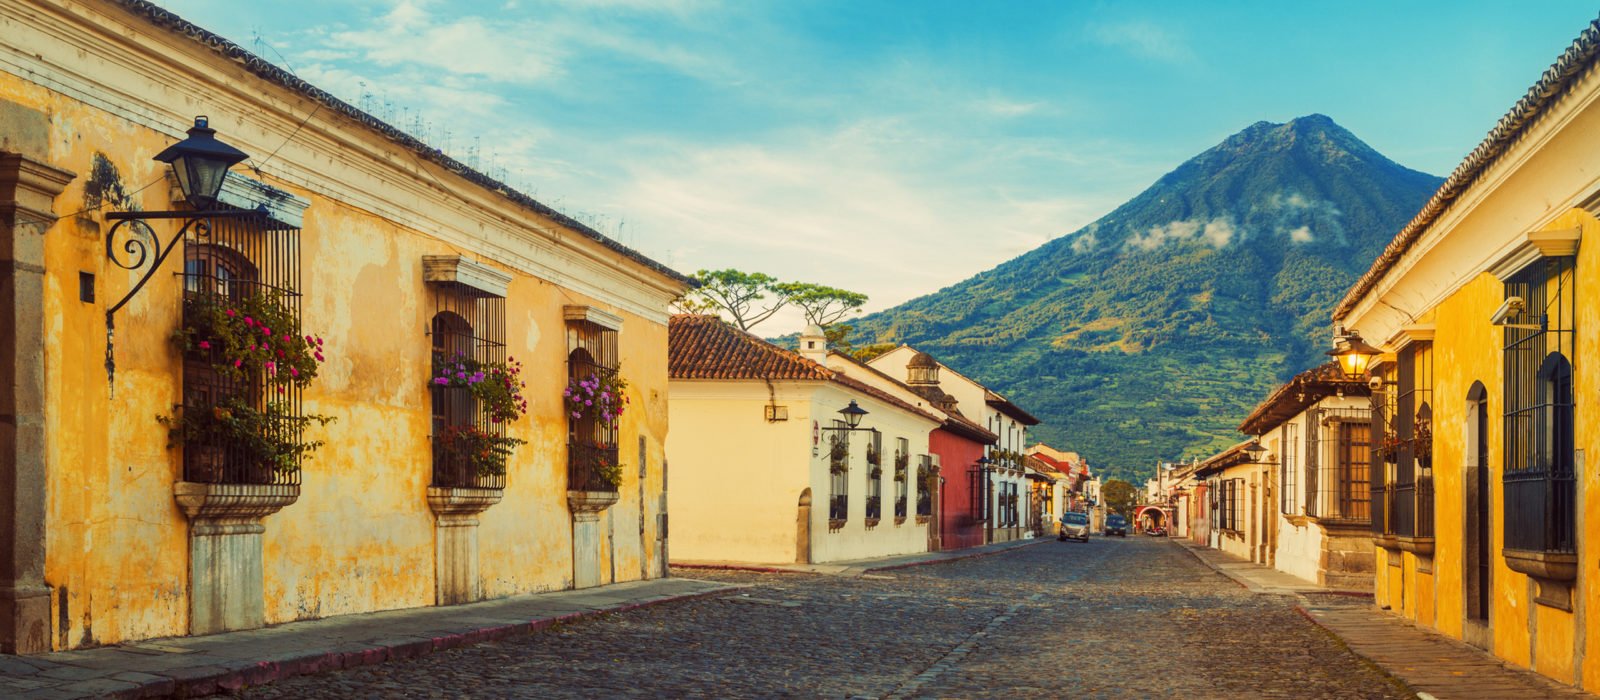 When is the Best Time to Visit Guatemala? Jacada Travel